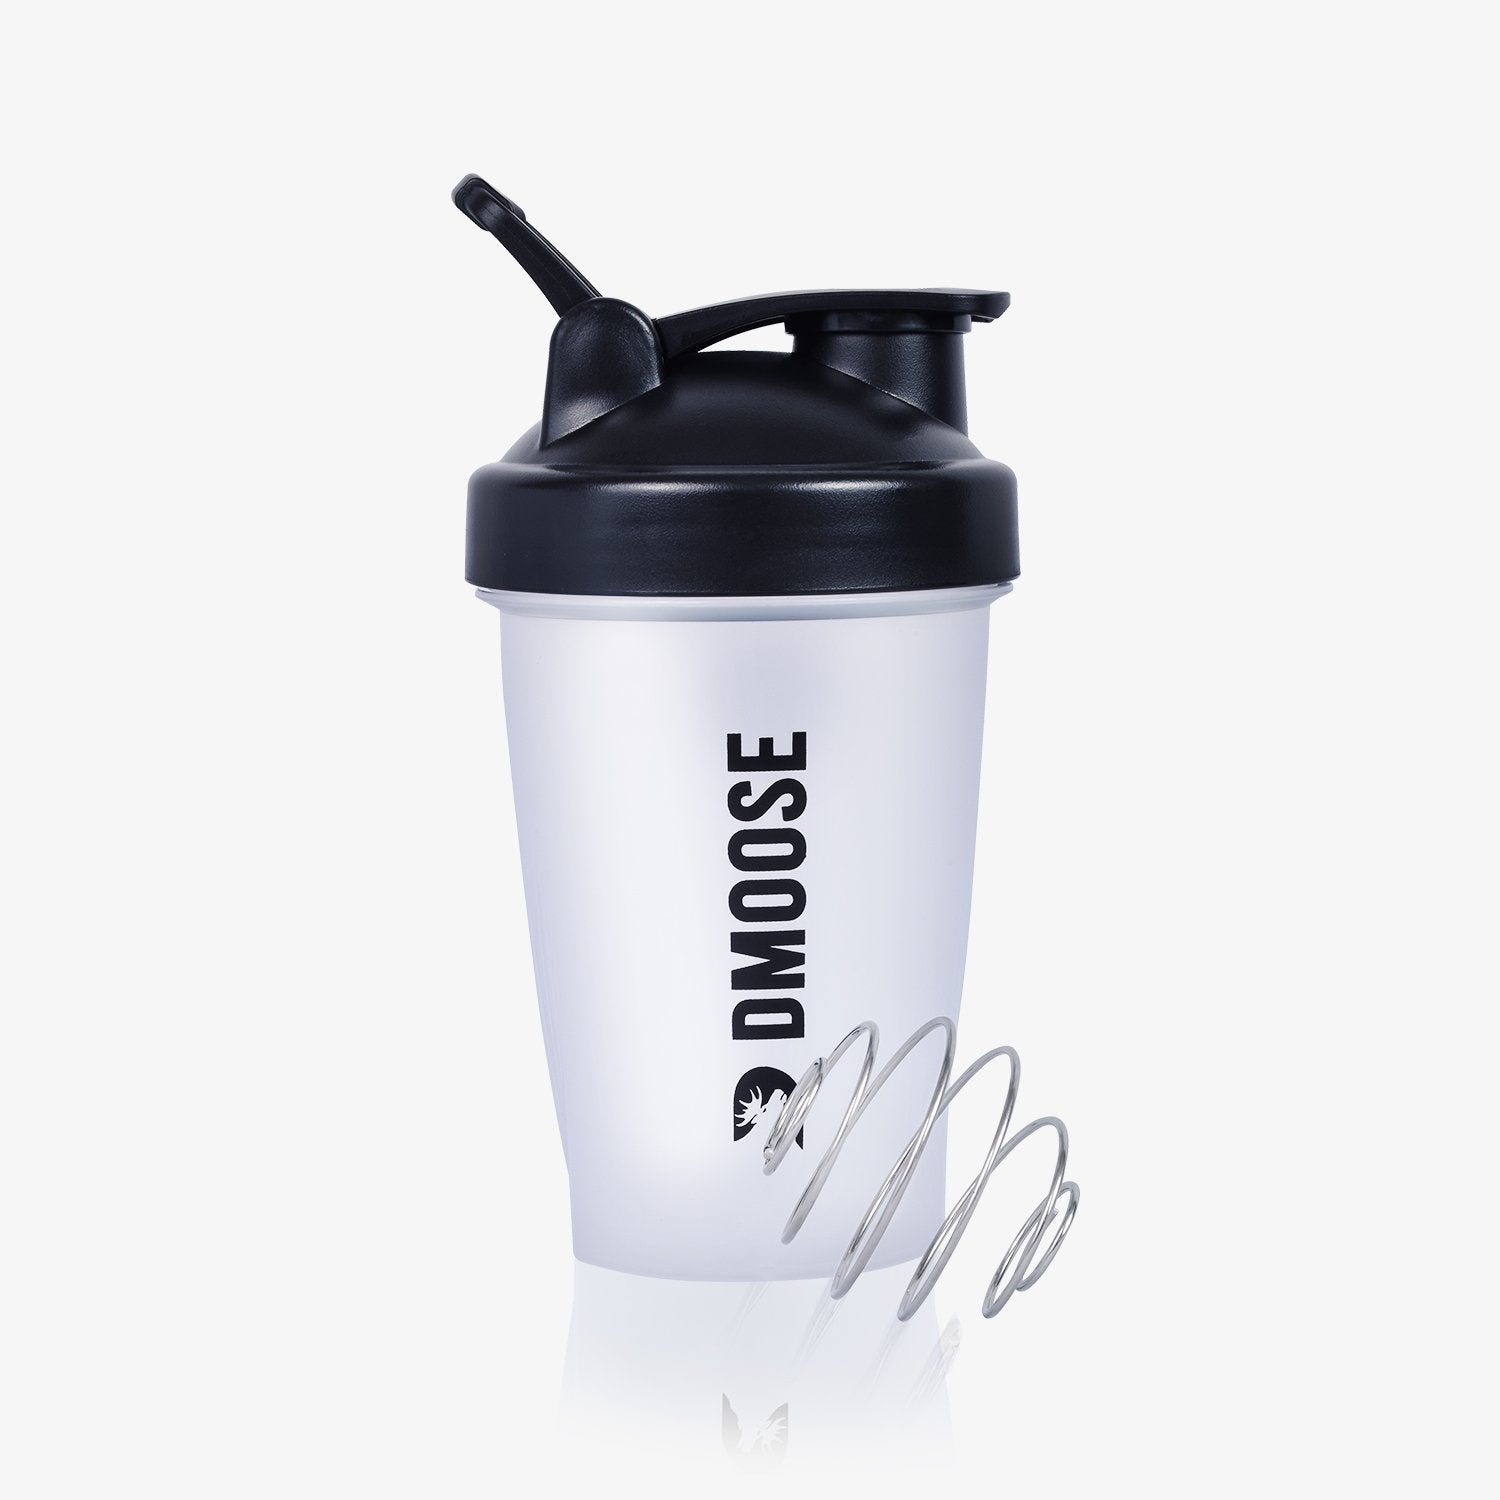 500ml Protein Shake Bottle,Smoothie Shaker & Gym Powder Bottle,Protein Mixes Shaker Cup,Stainless Steel Water Bottle and Protein Shaker,Reusable